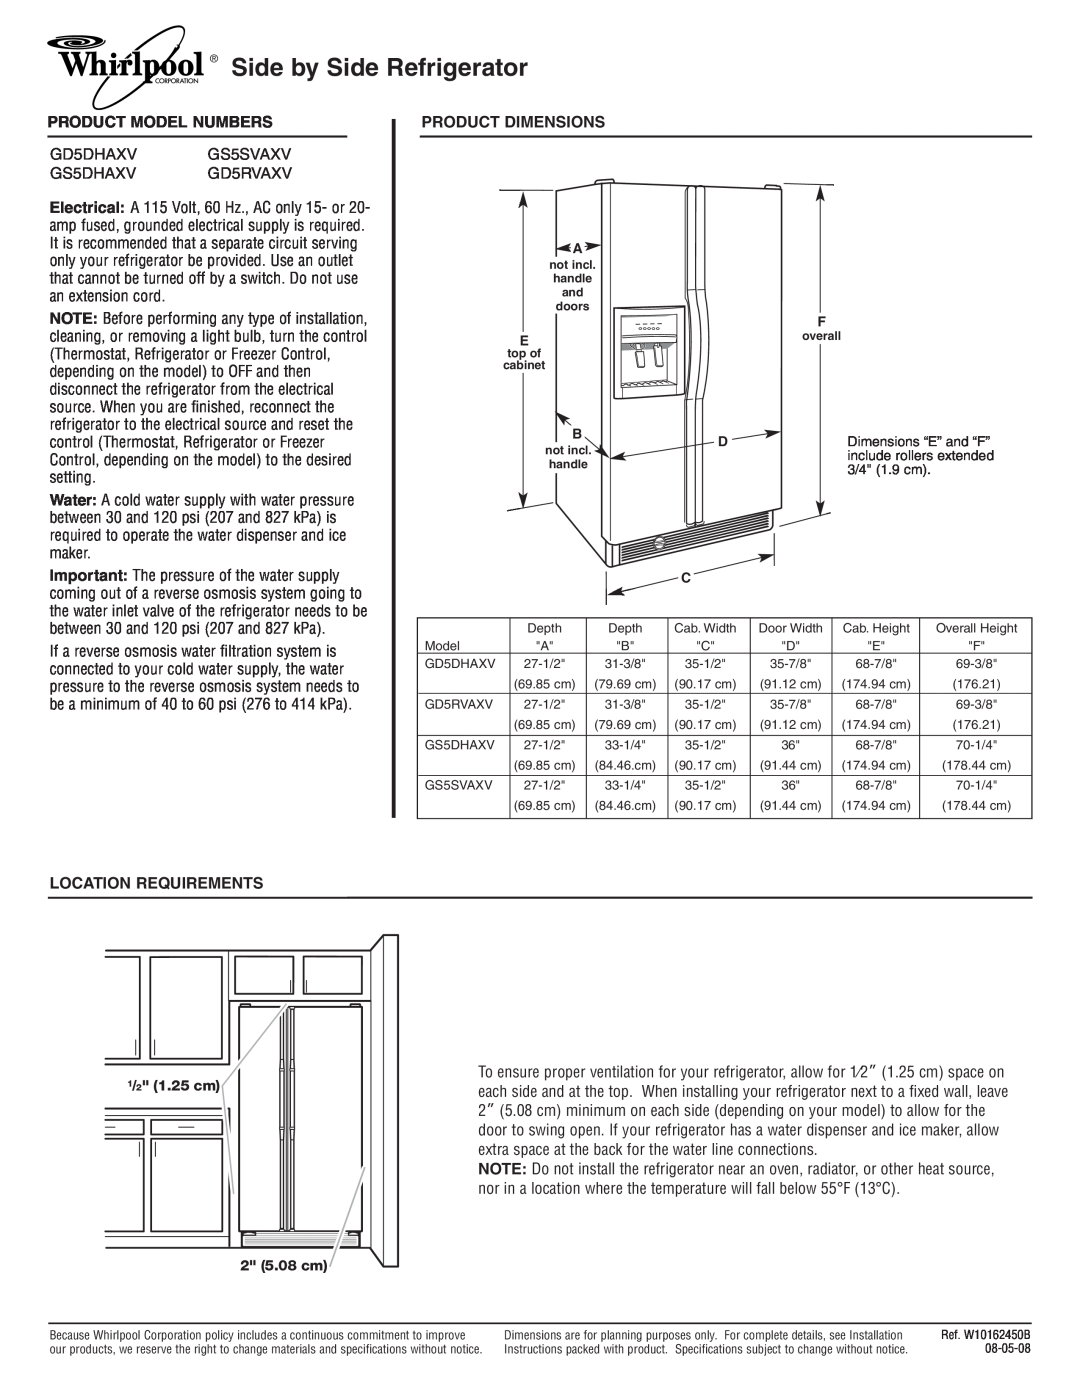 Whirlpool GS5DHAXV dimensions Side by Side Refrigerator, Product Model Numbers, Product Dimensions, Location Requirements 